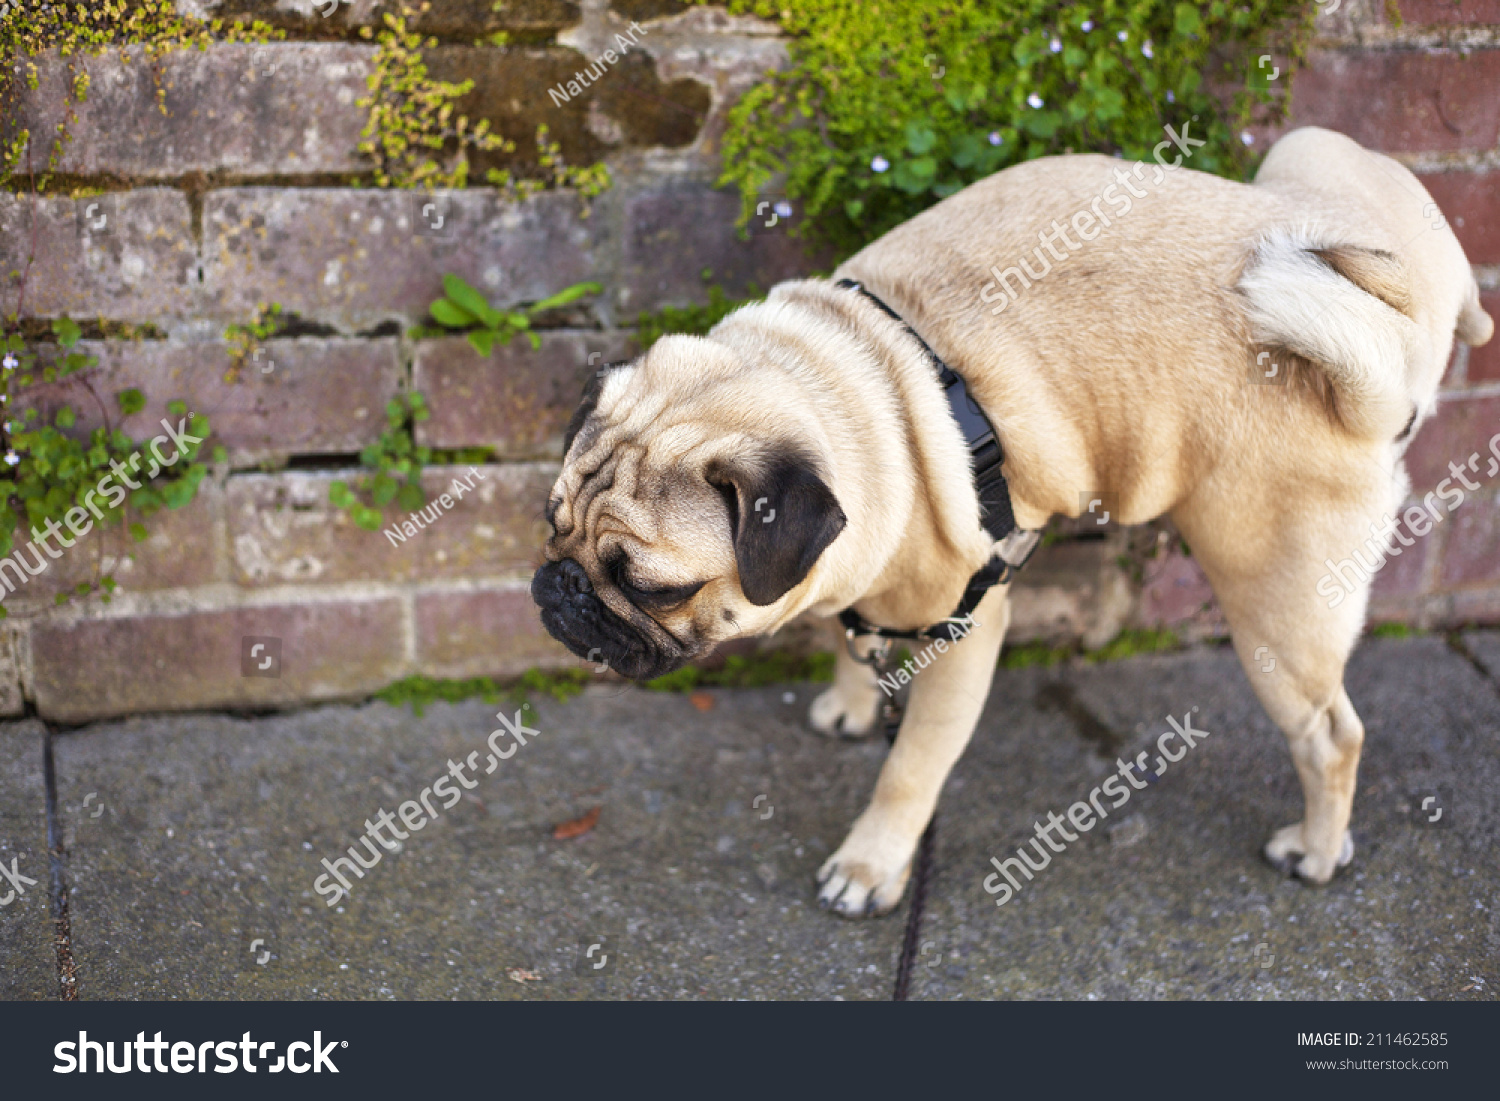 stock-photo-male-pug-dog-is-pissing-on-the-wall-of-red-bricks-211462585.jpg